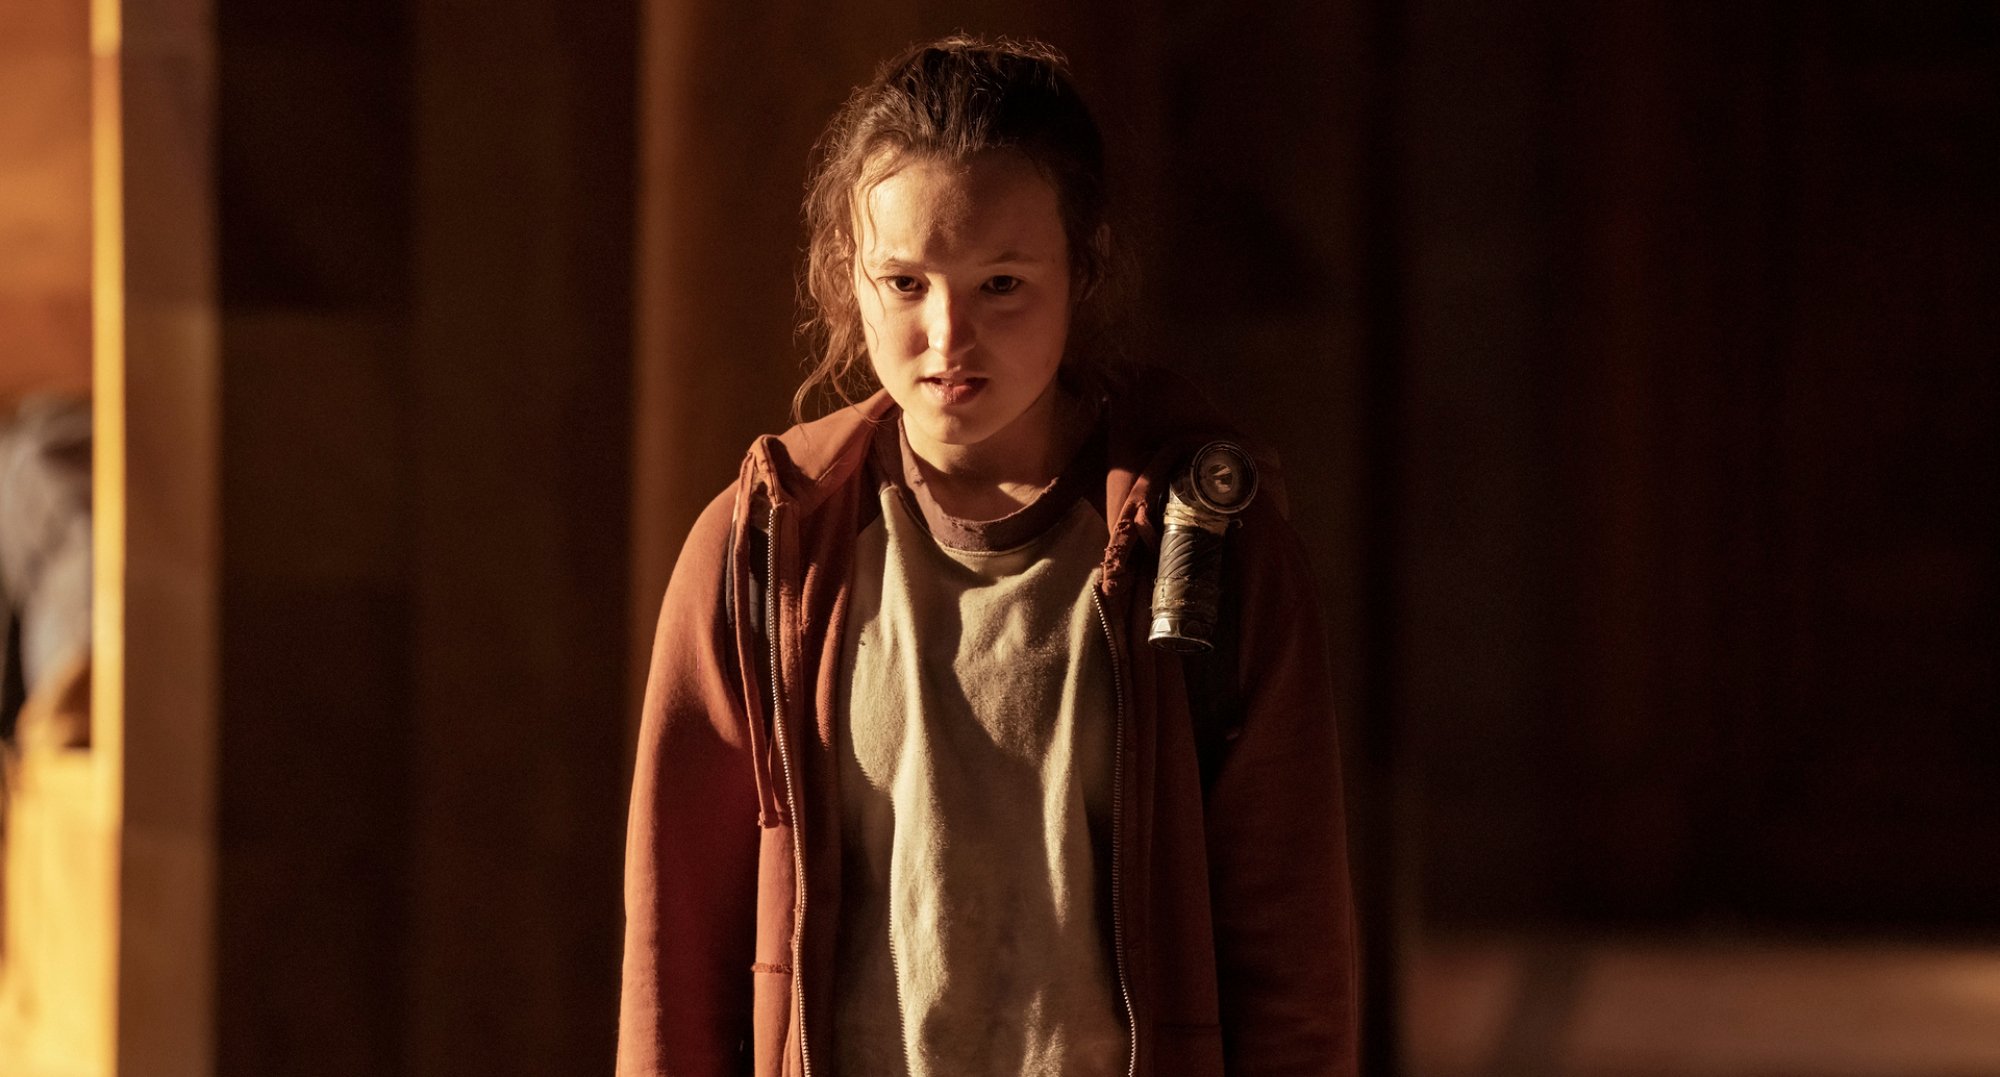 ‘The Last of Us’: Actor Bella Ramsey Perfected Her American Accent Thanks to Curse Words